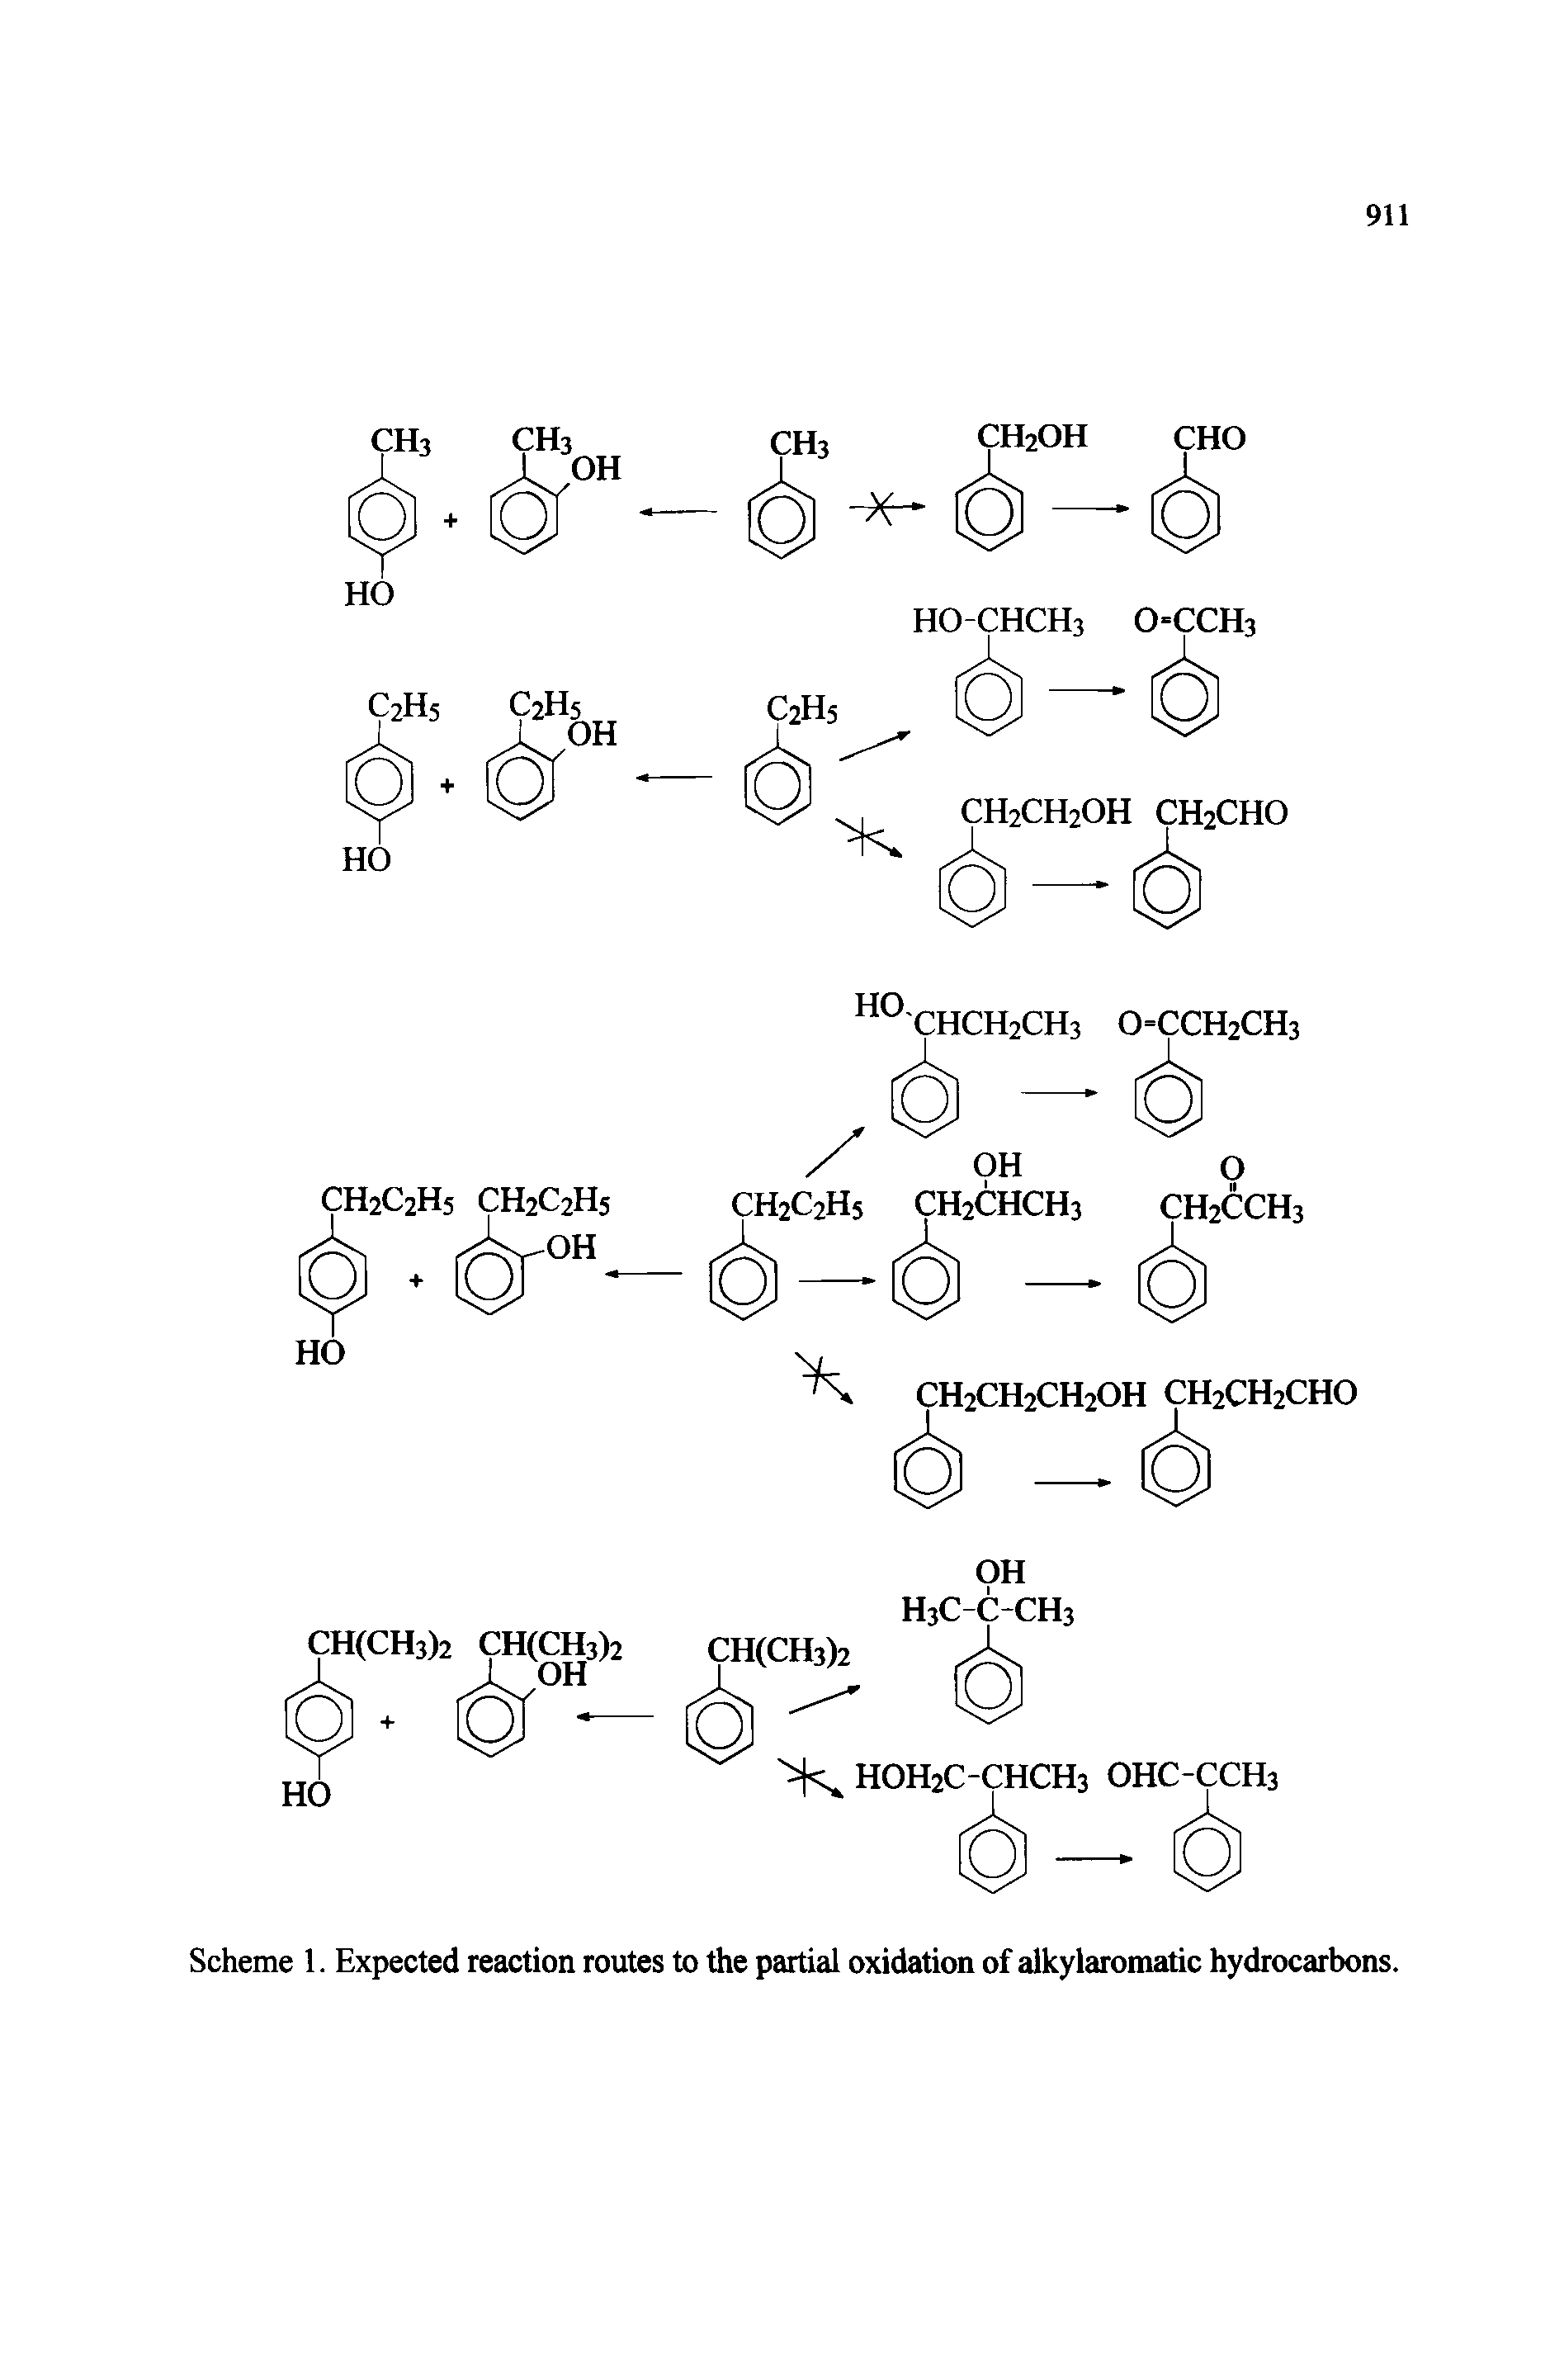 Scheme 1. Expected reaction routes to the partial oxidation of alkylaromatic hydrocarbons.